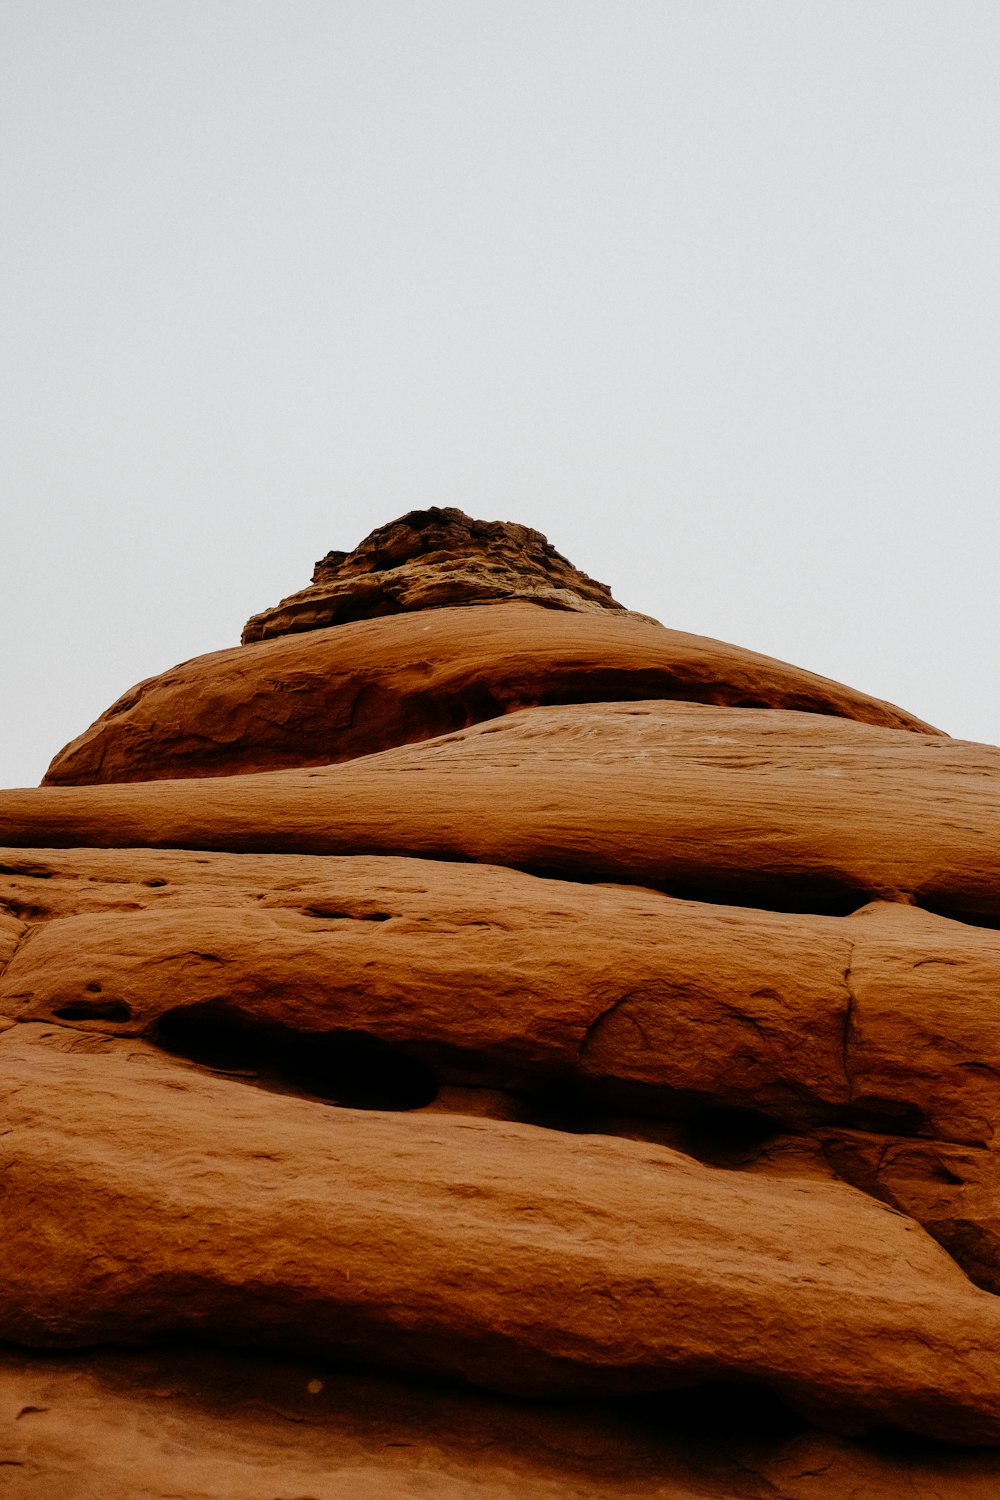 a bird is perched on top of a rock formation